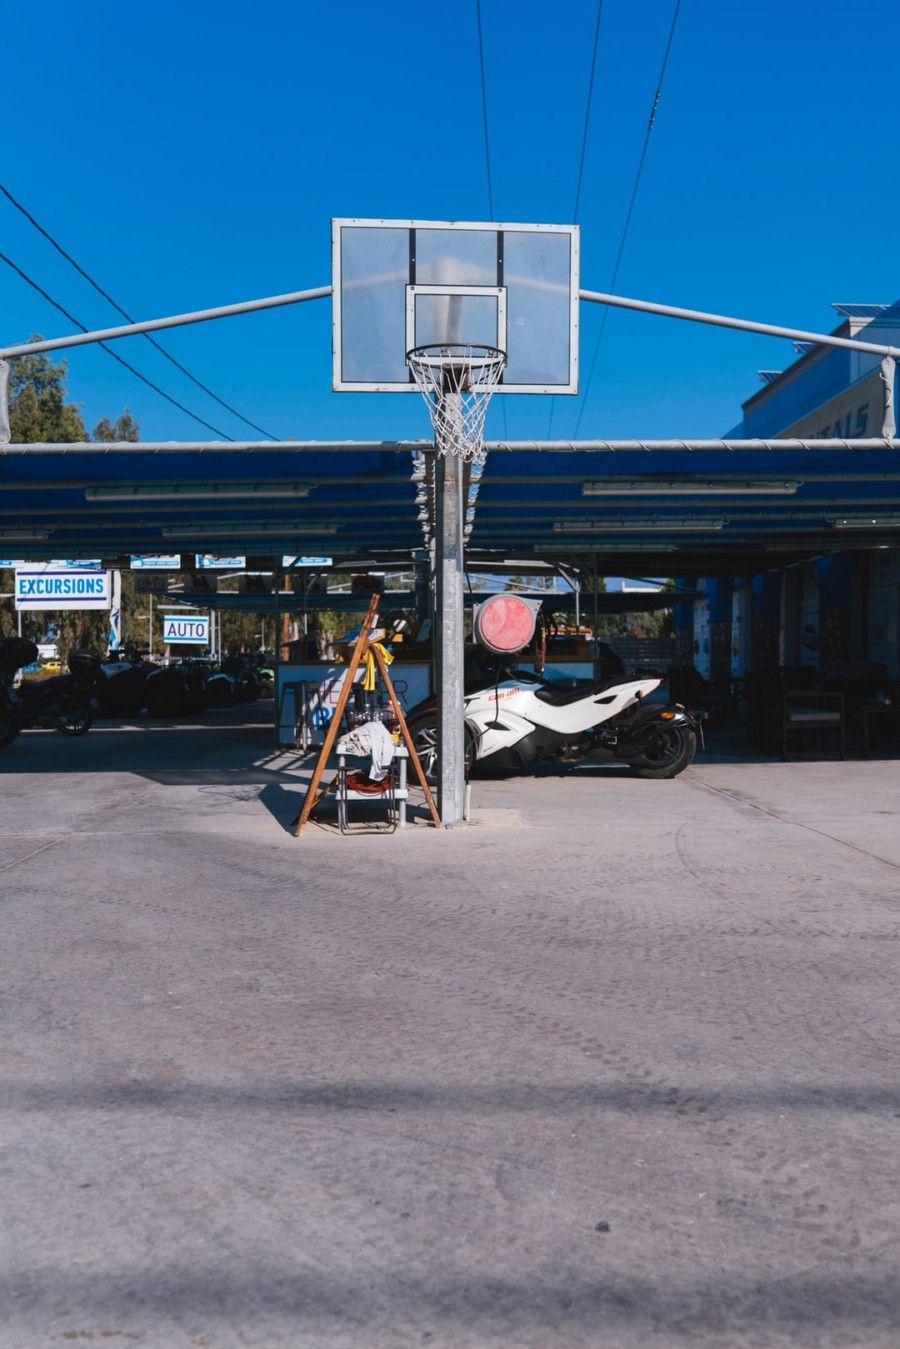 basketball-system-in-front-of-white-sports-bike-parked-under-blue-roofed-space-during-daytime